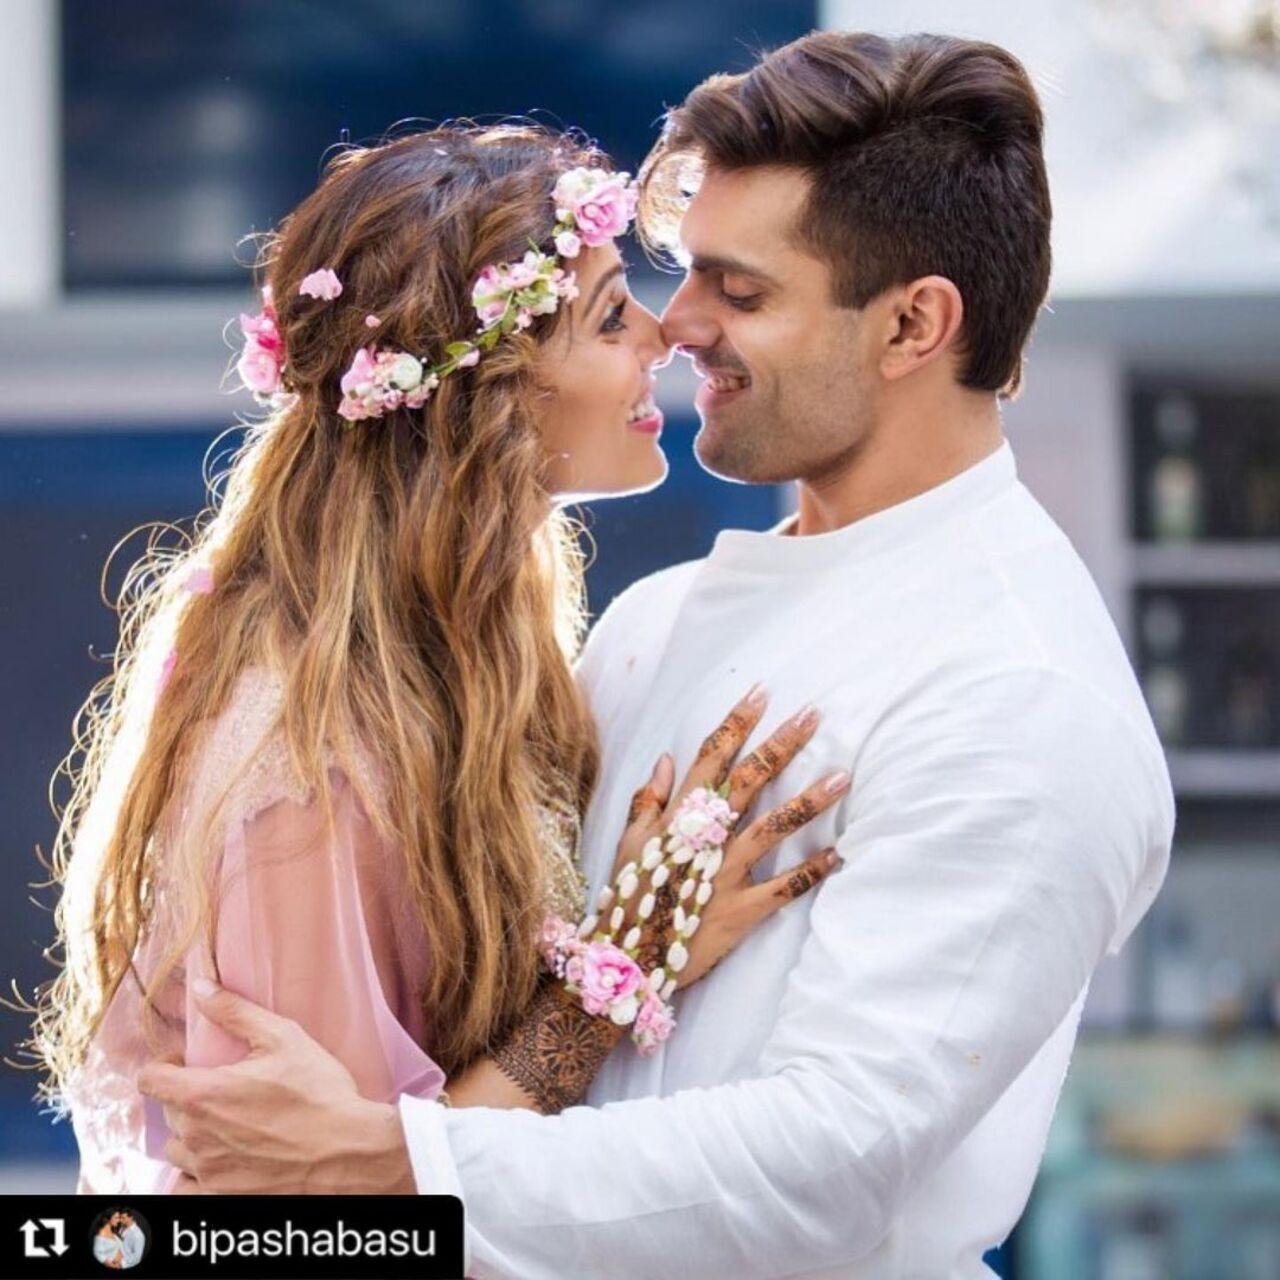 Karan Singh Grover and Bipasha Basu got married on April 30, 2016, after dating for some time